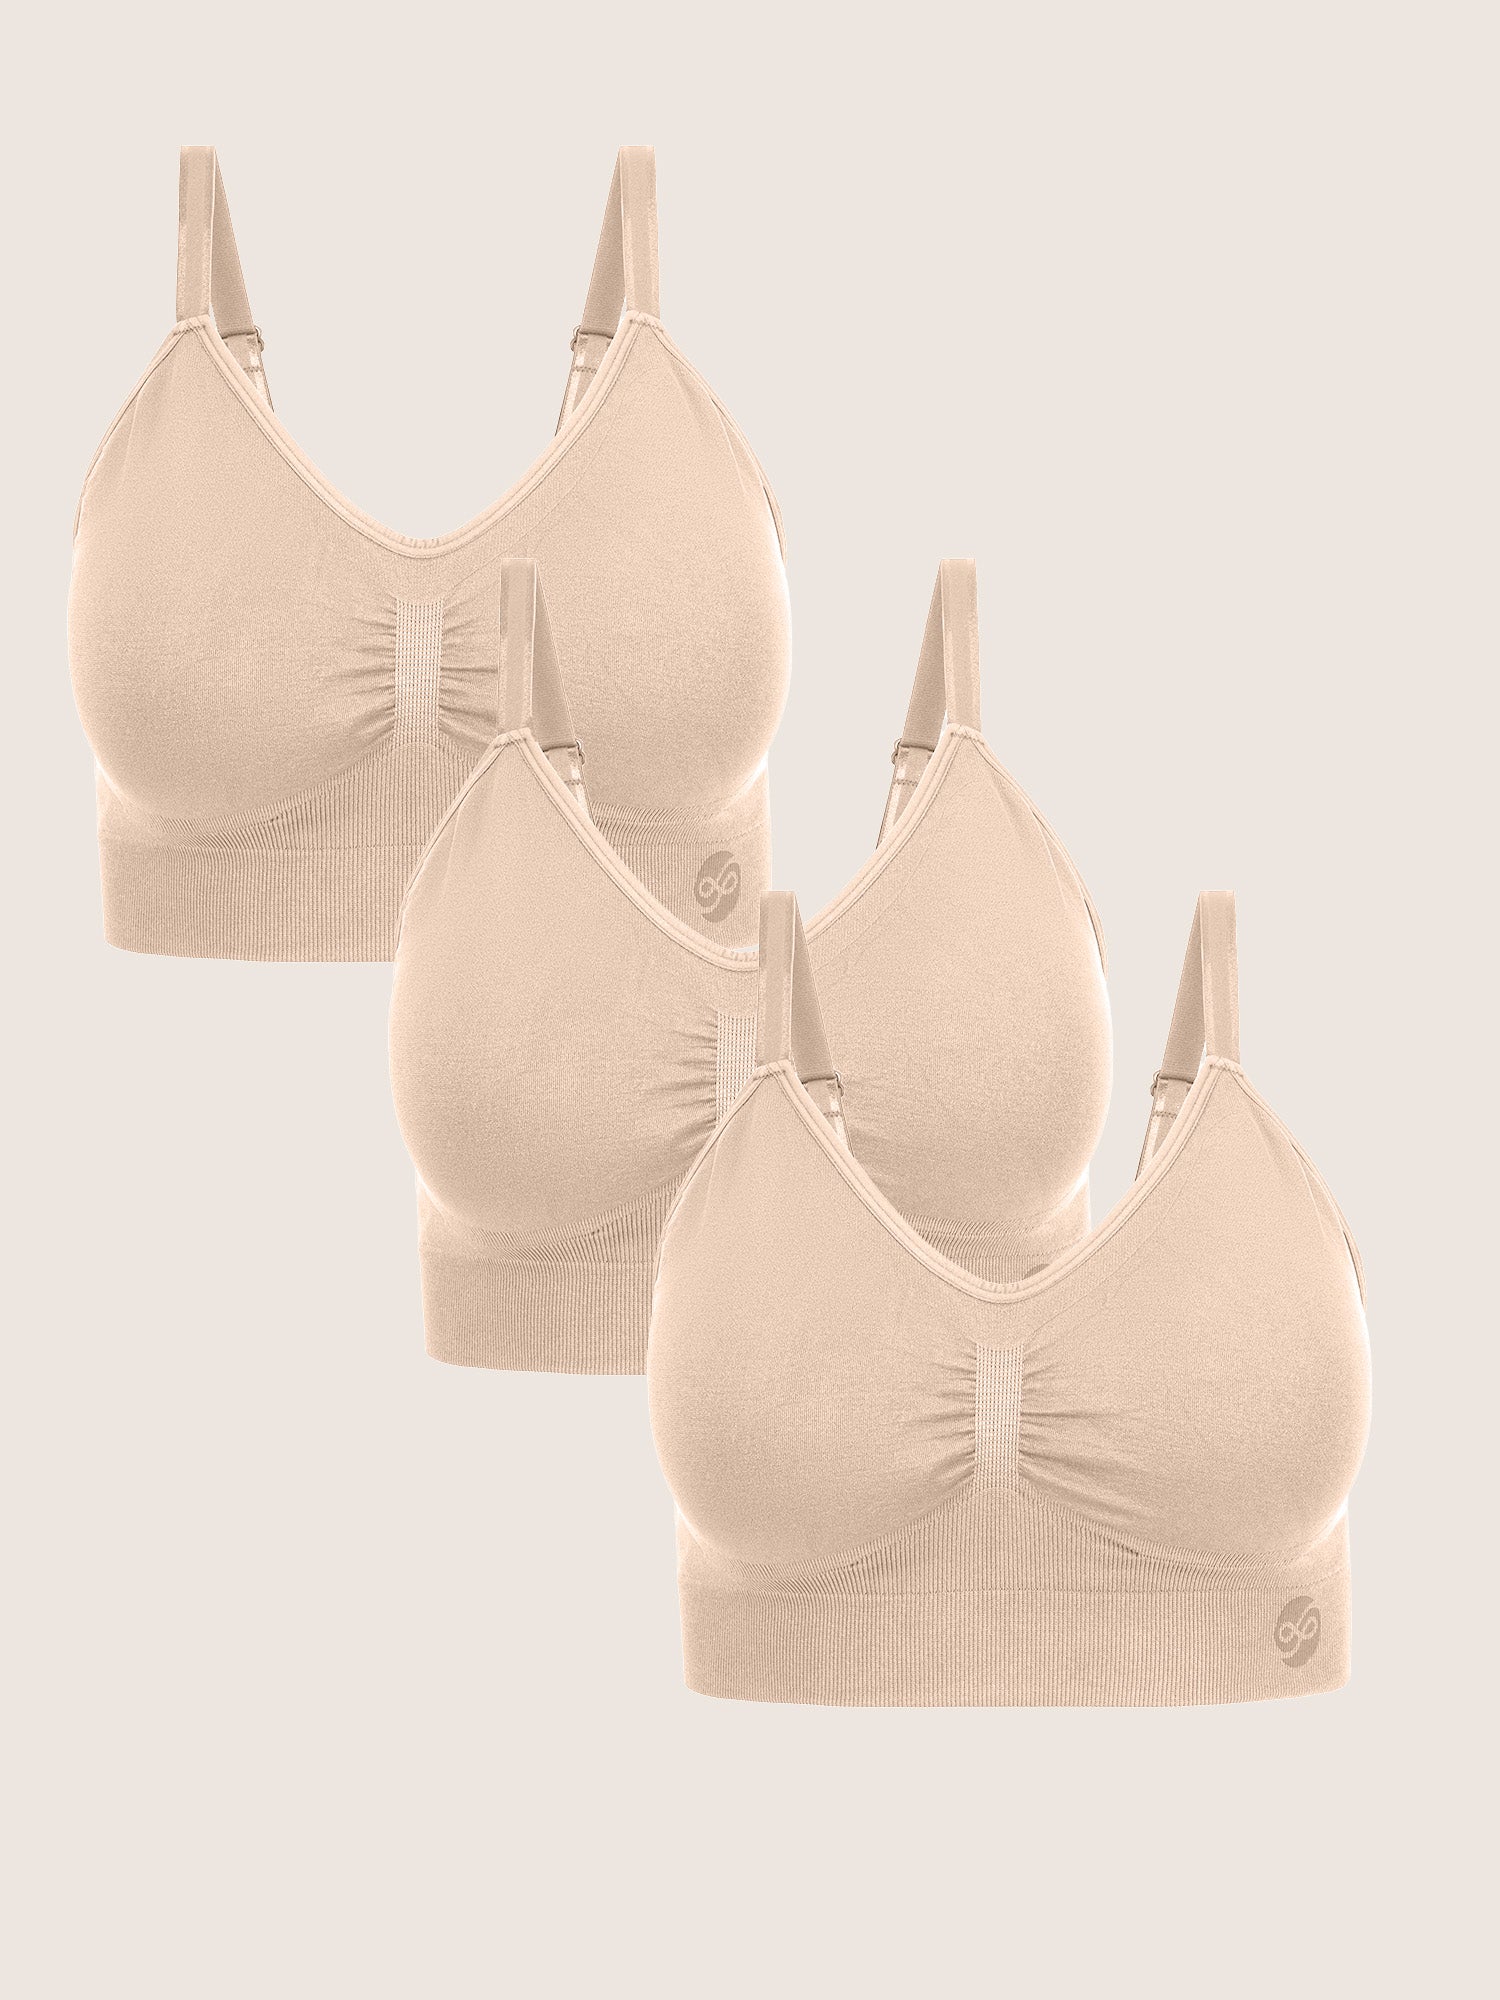 Delivery Today】 Original 3 Pack Bebe Intimates Sexy Wireless